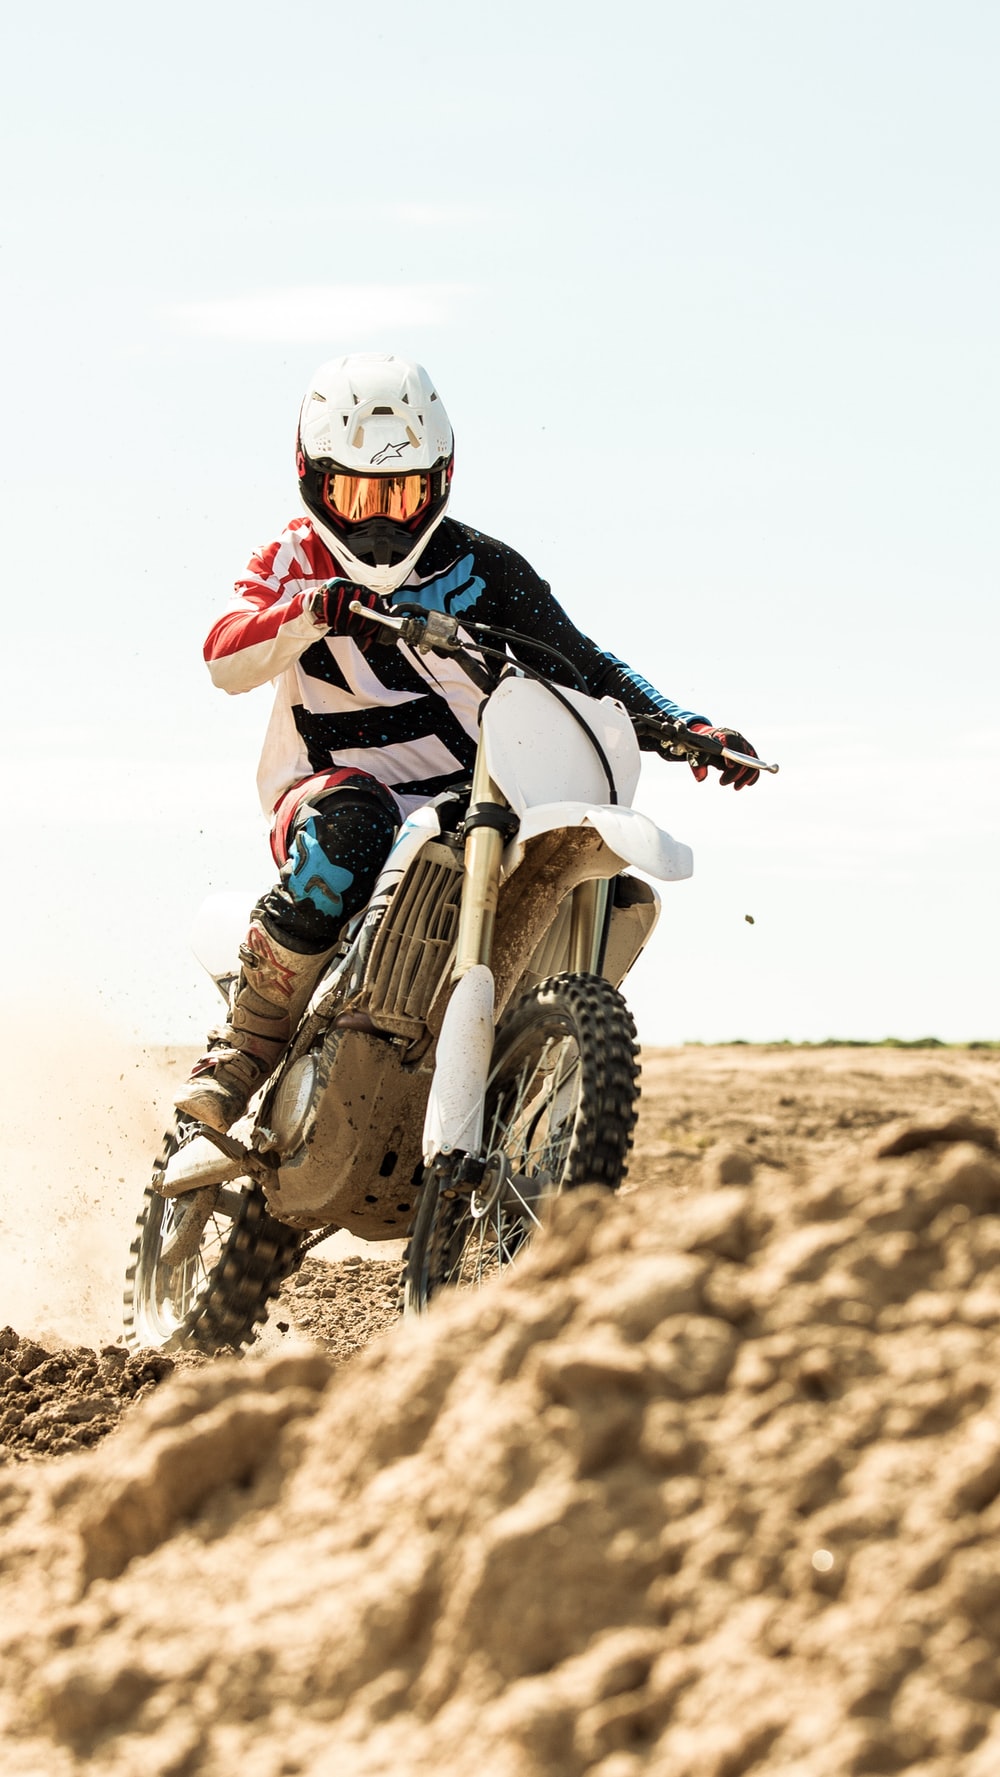 Motocross Picture [HD]. Download Free Image